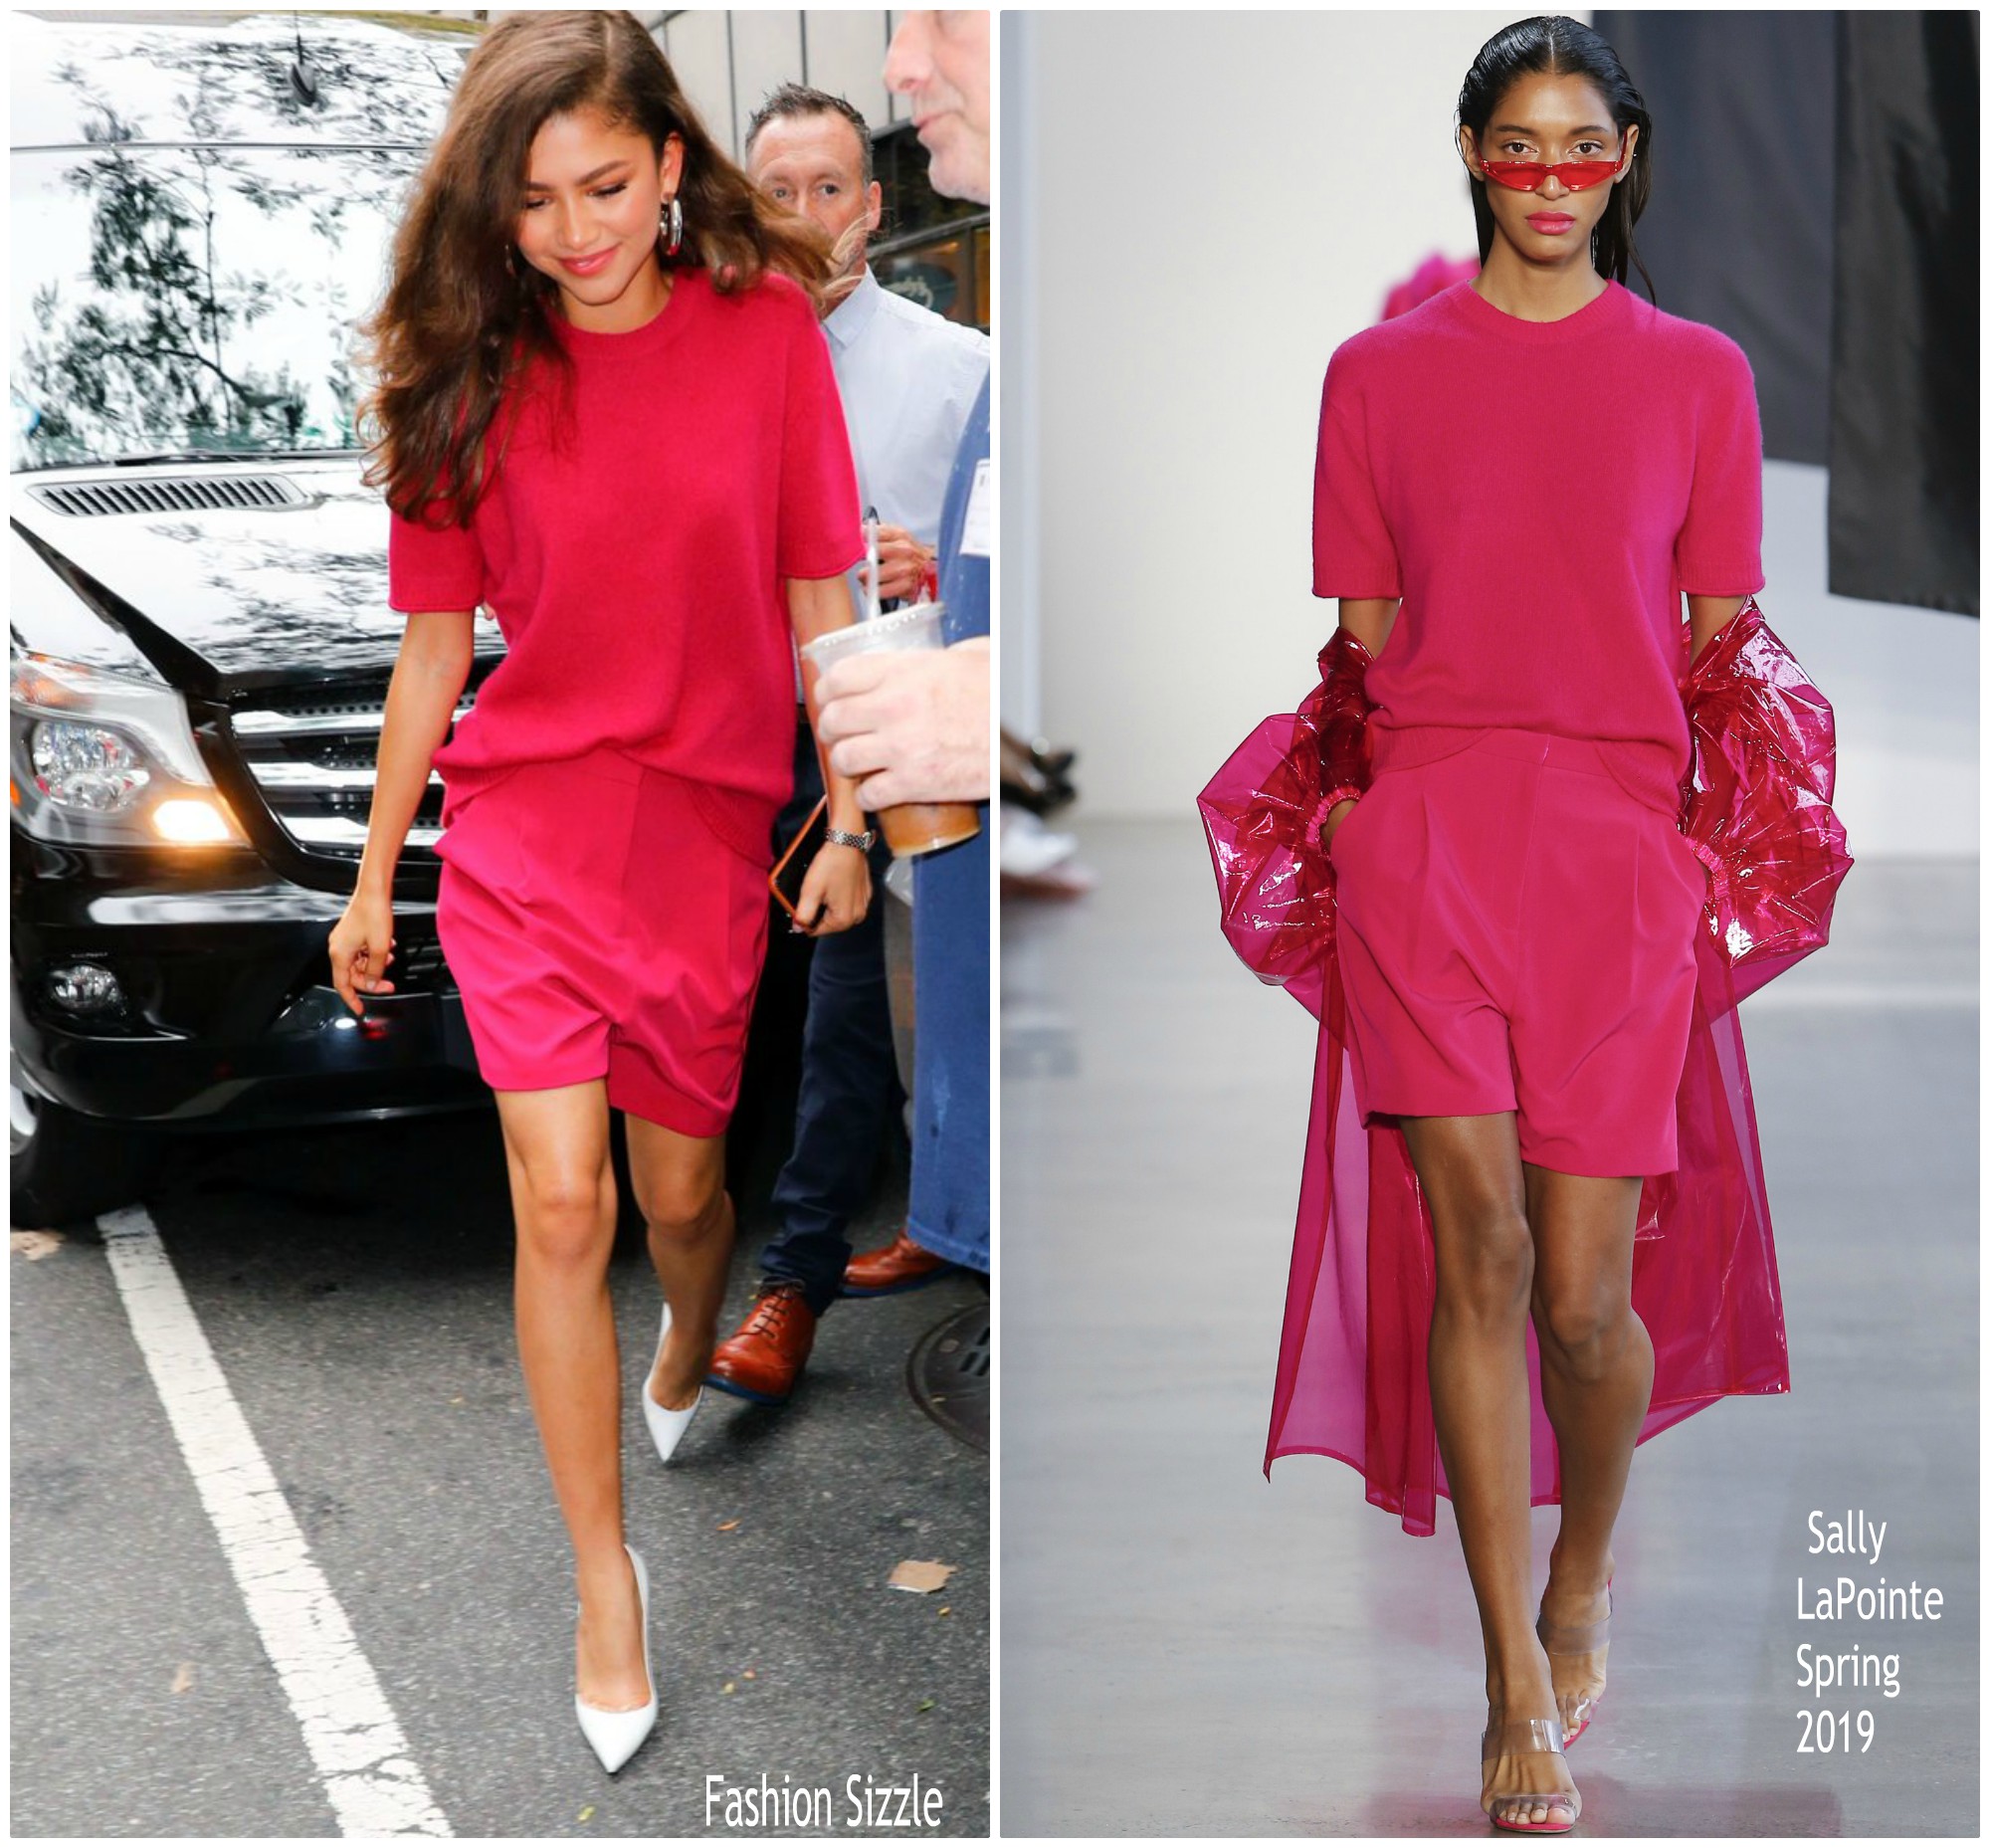 Zendaya Coleman In Sally La Pointe @ International Day of The Girl Child At Today Show